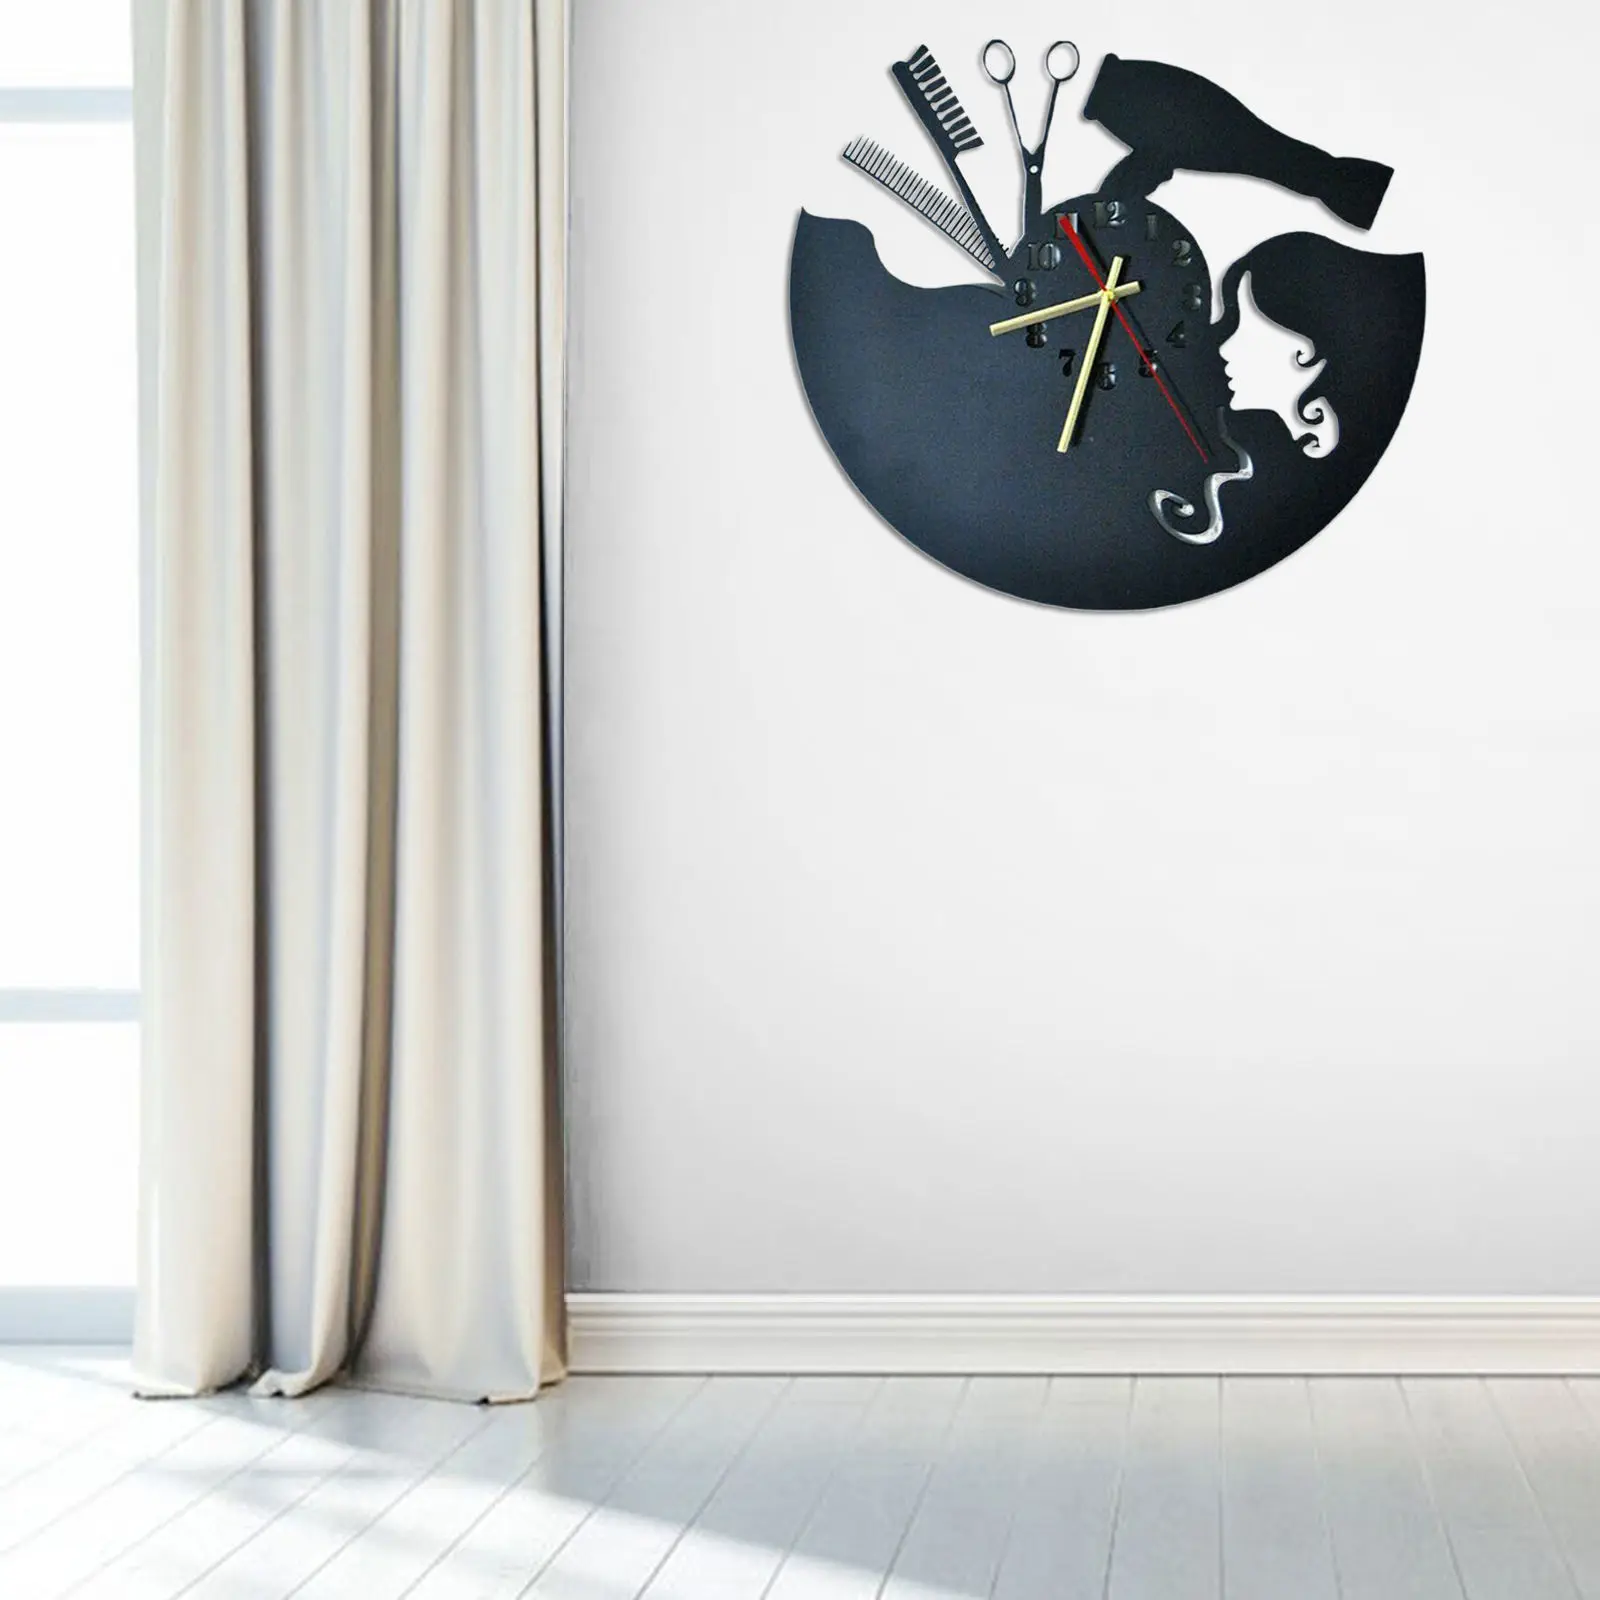 Hairdresser Wall Clock Silent Non Ticking Black for Art Decorations Classroom Home Office